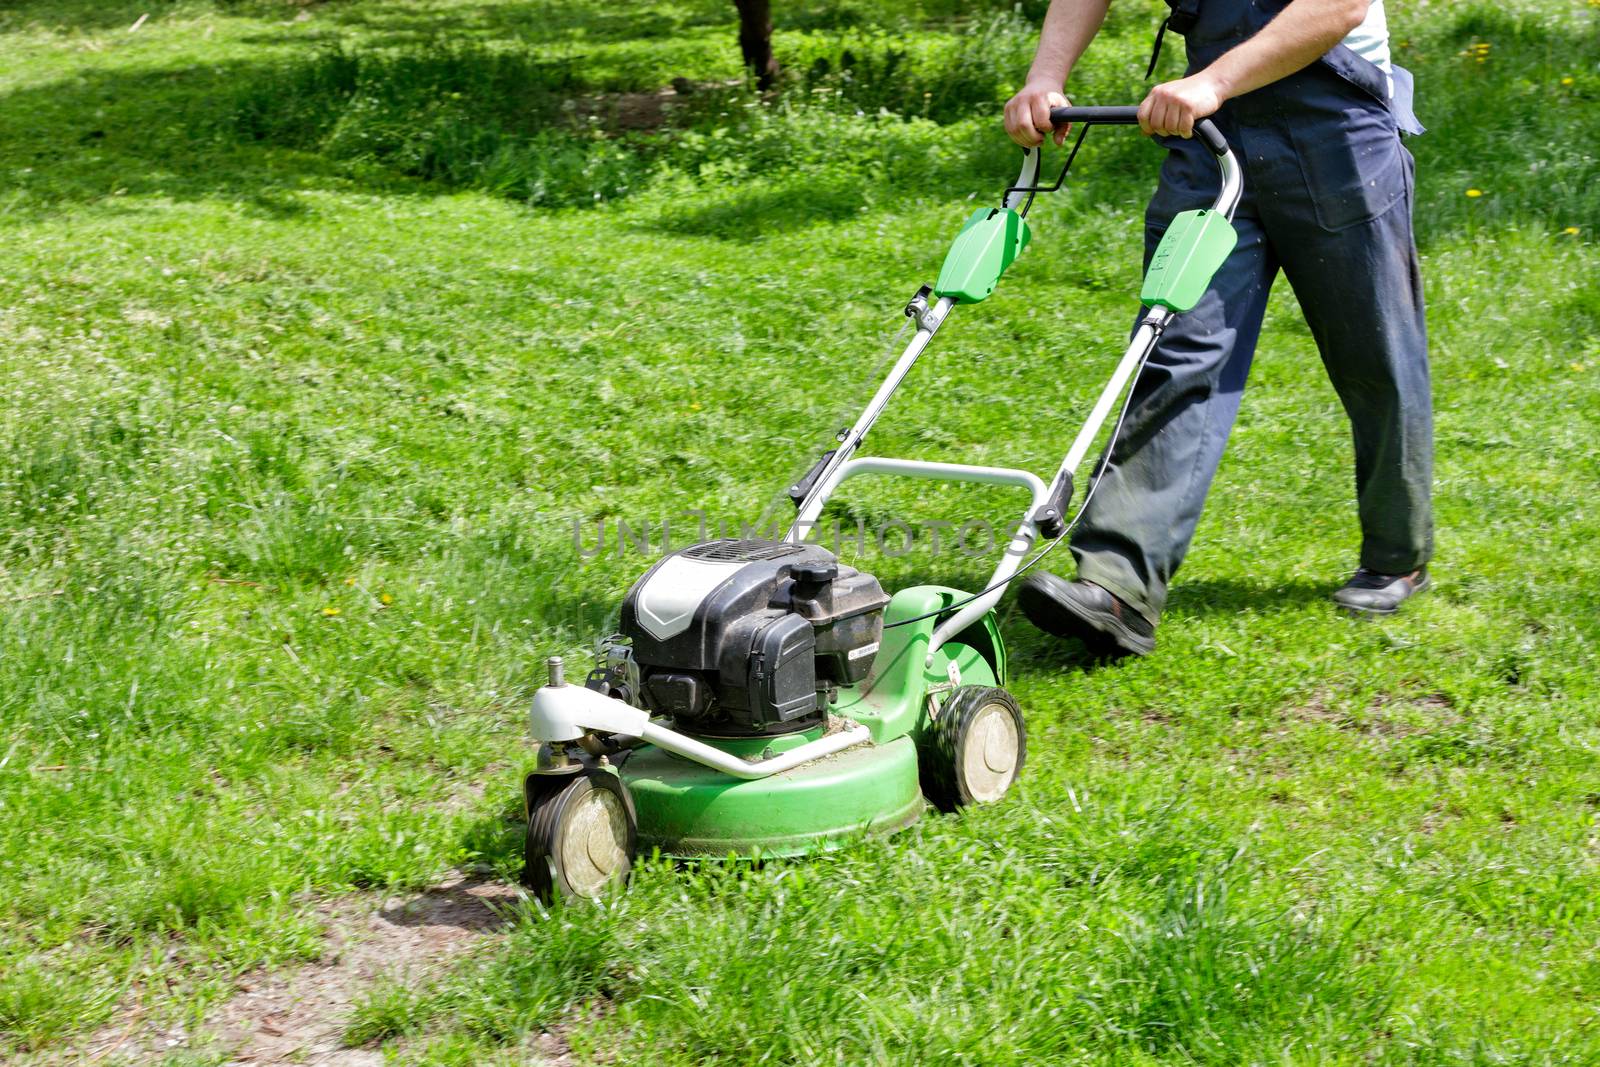 Worker with a gas mower mows the lawn in a city park.